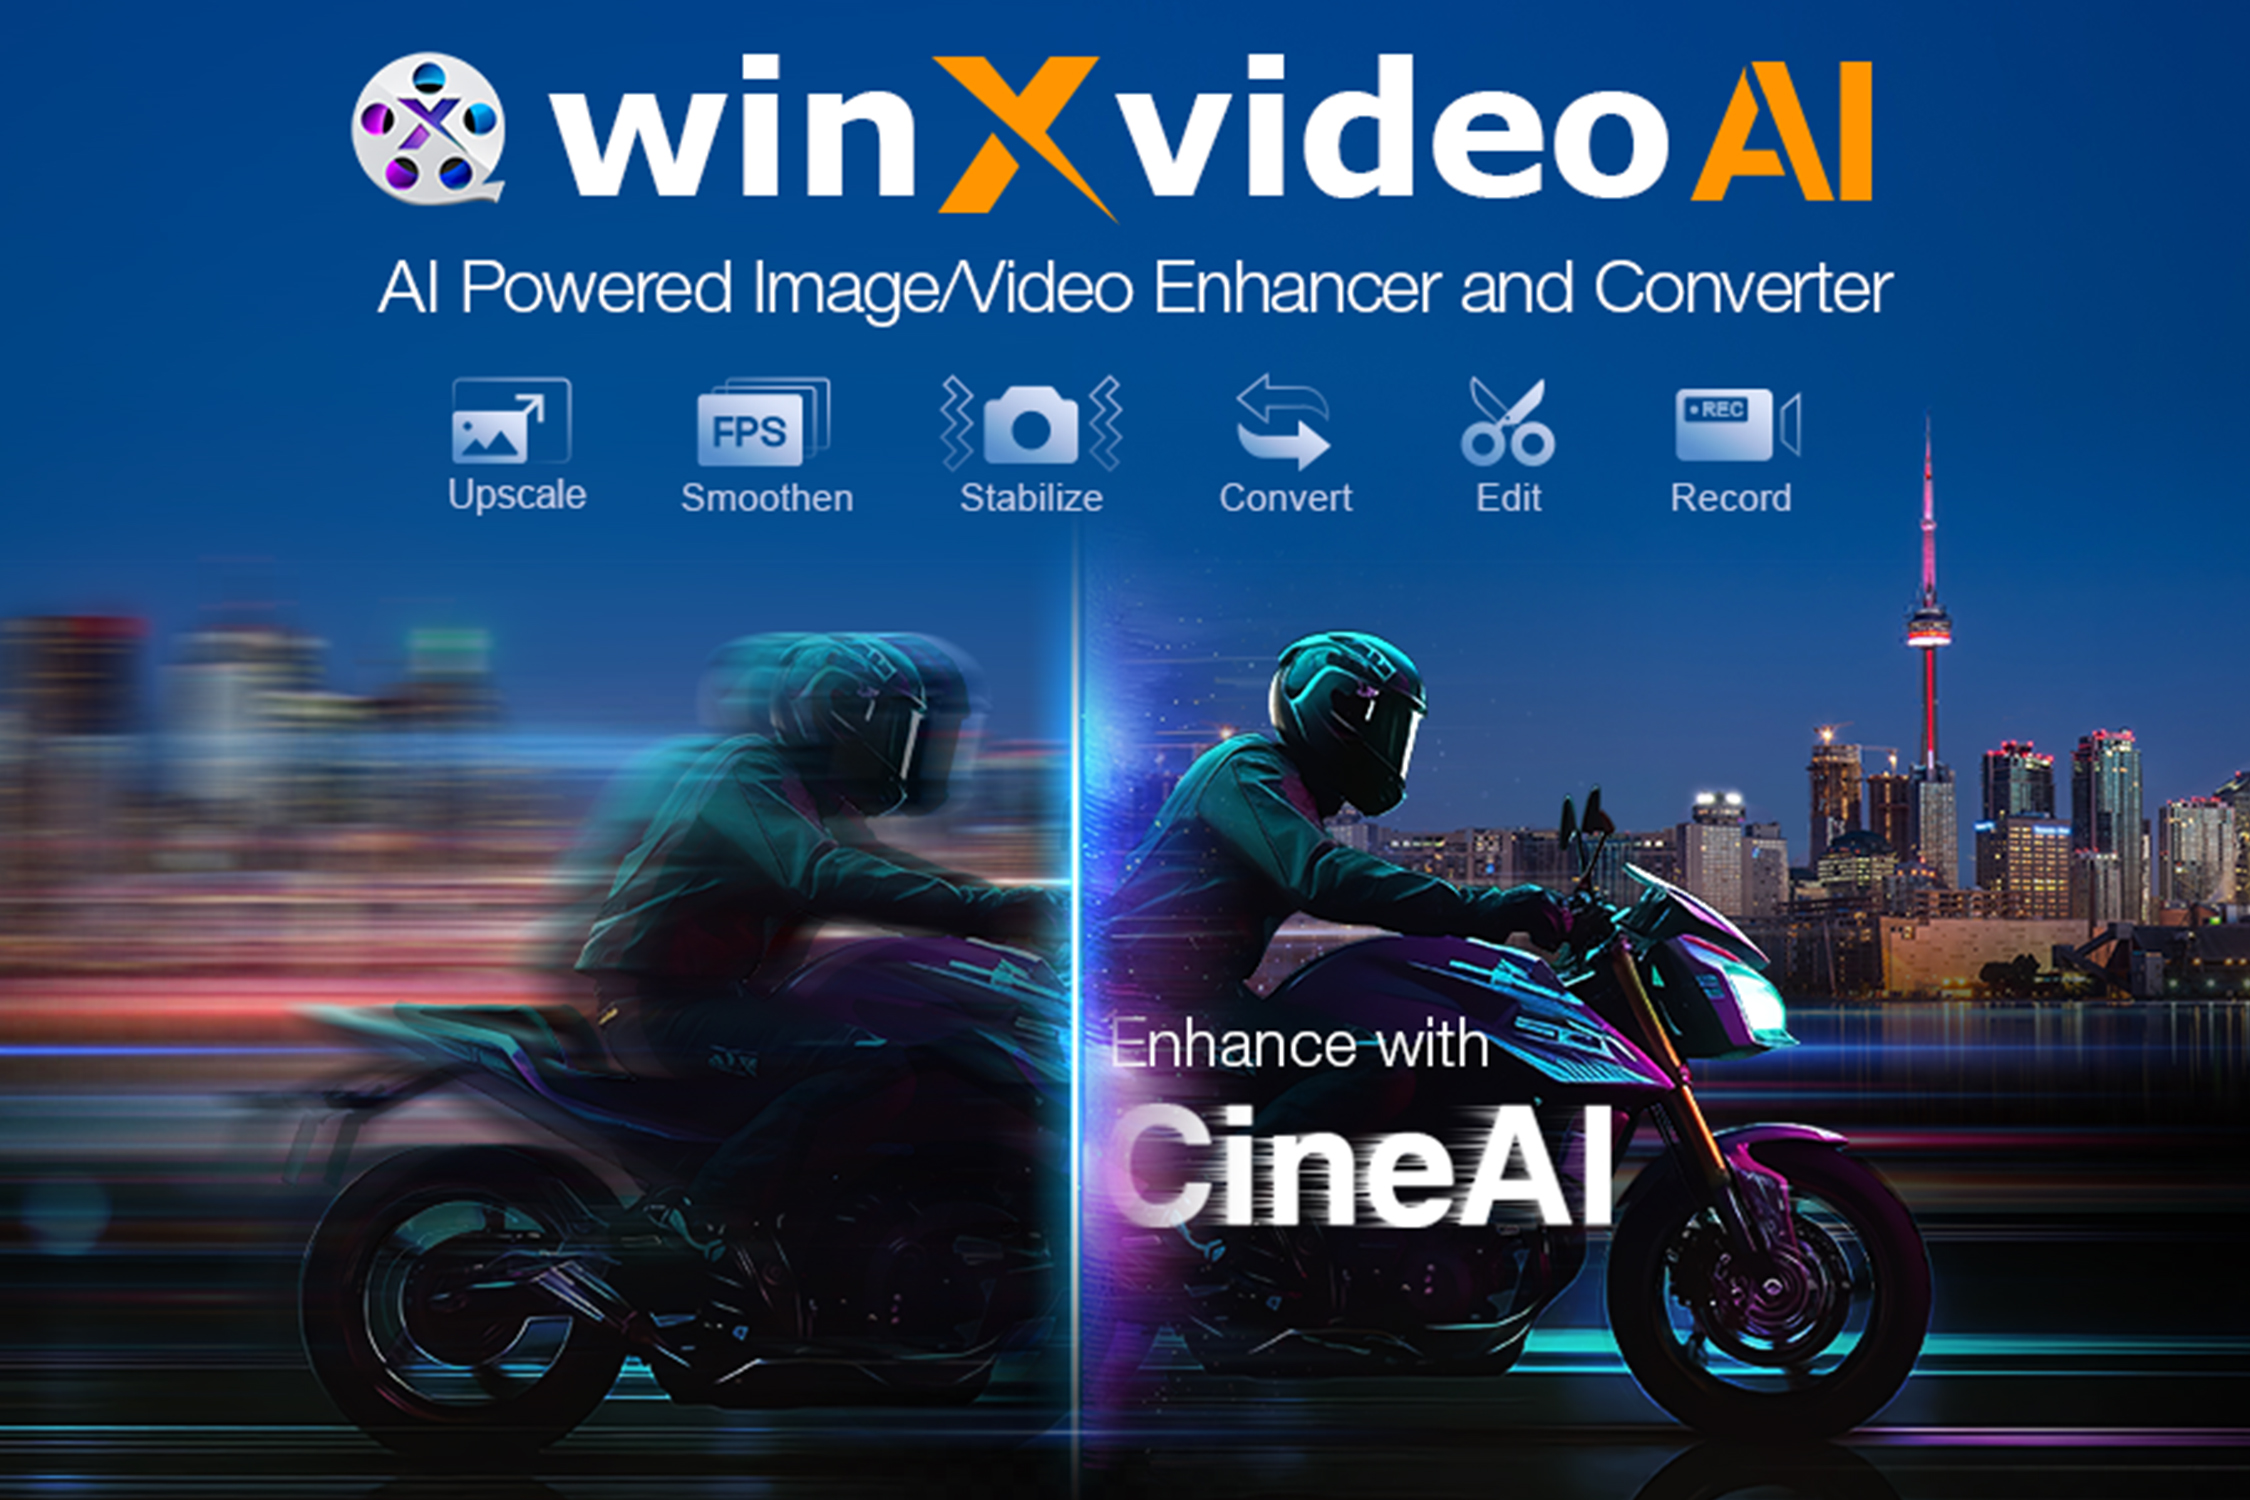 Enhance your video and image editing with an further 20% off Winxvideo